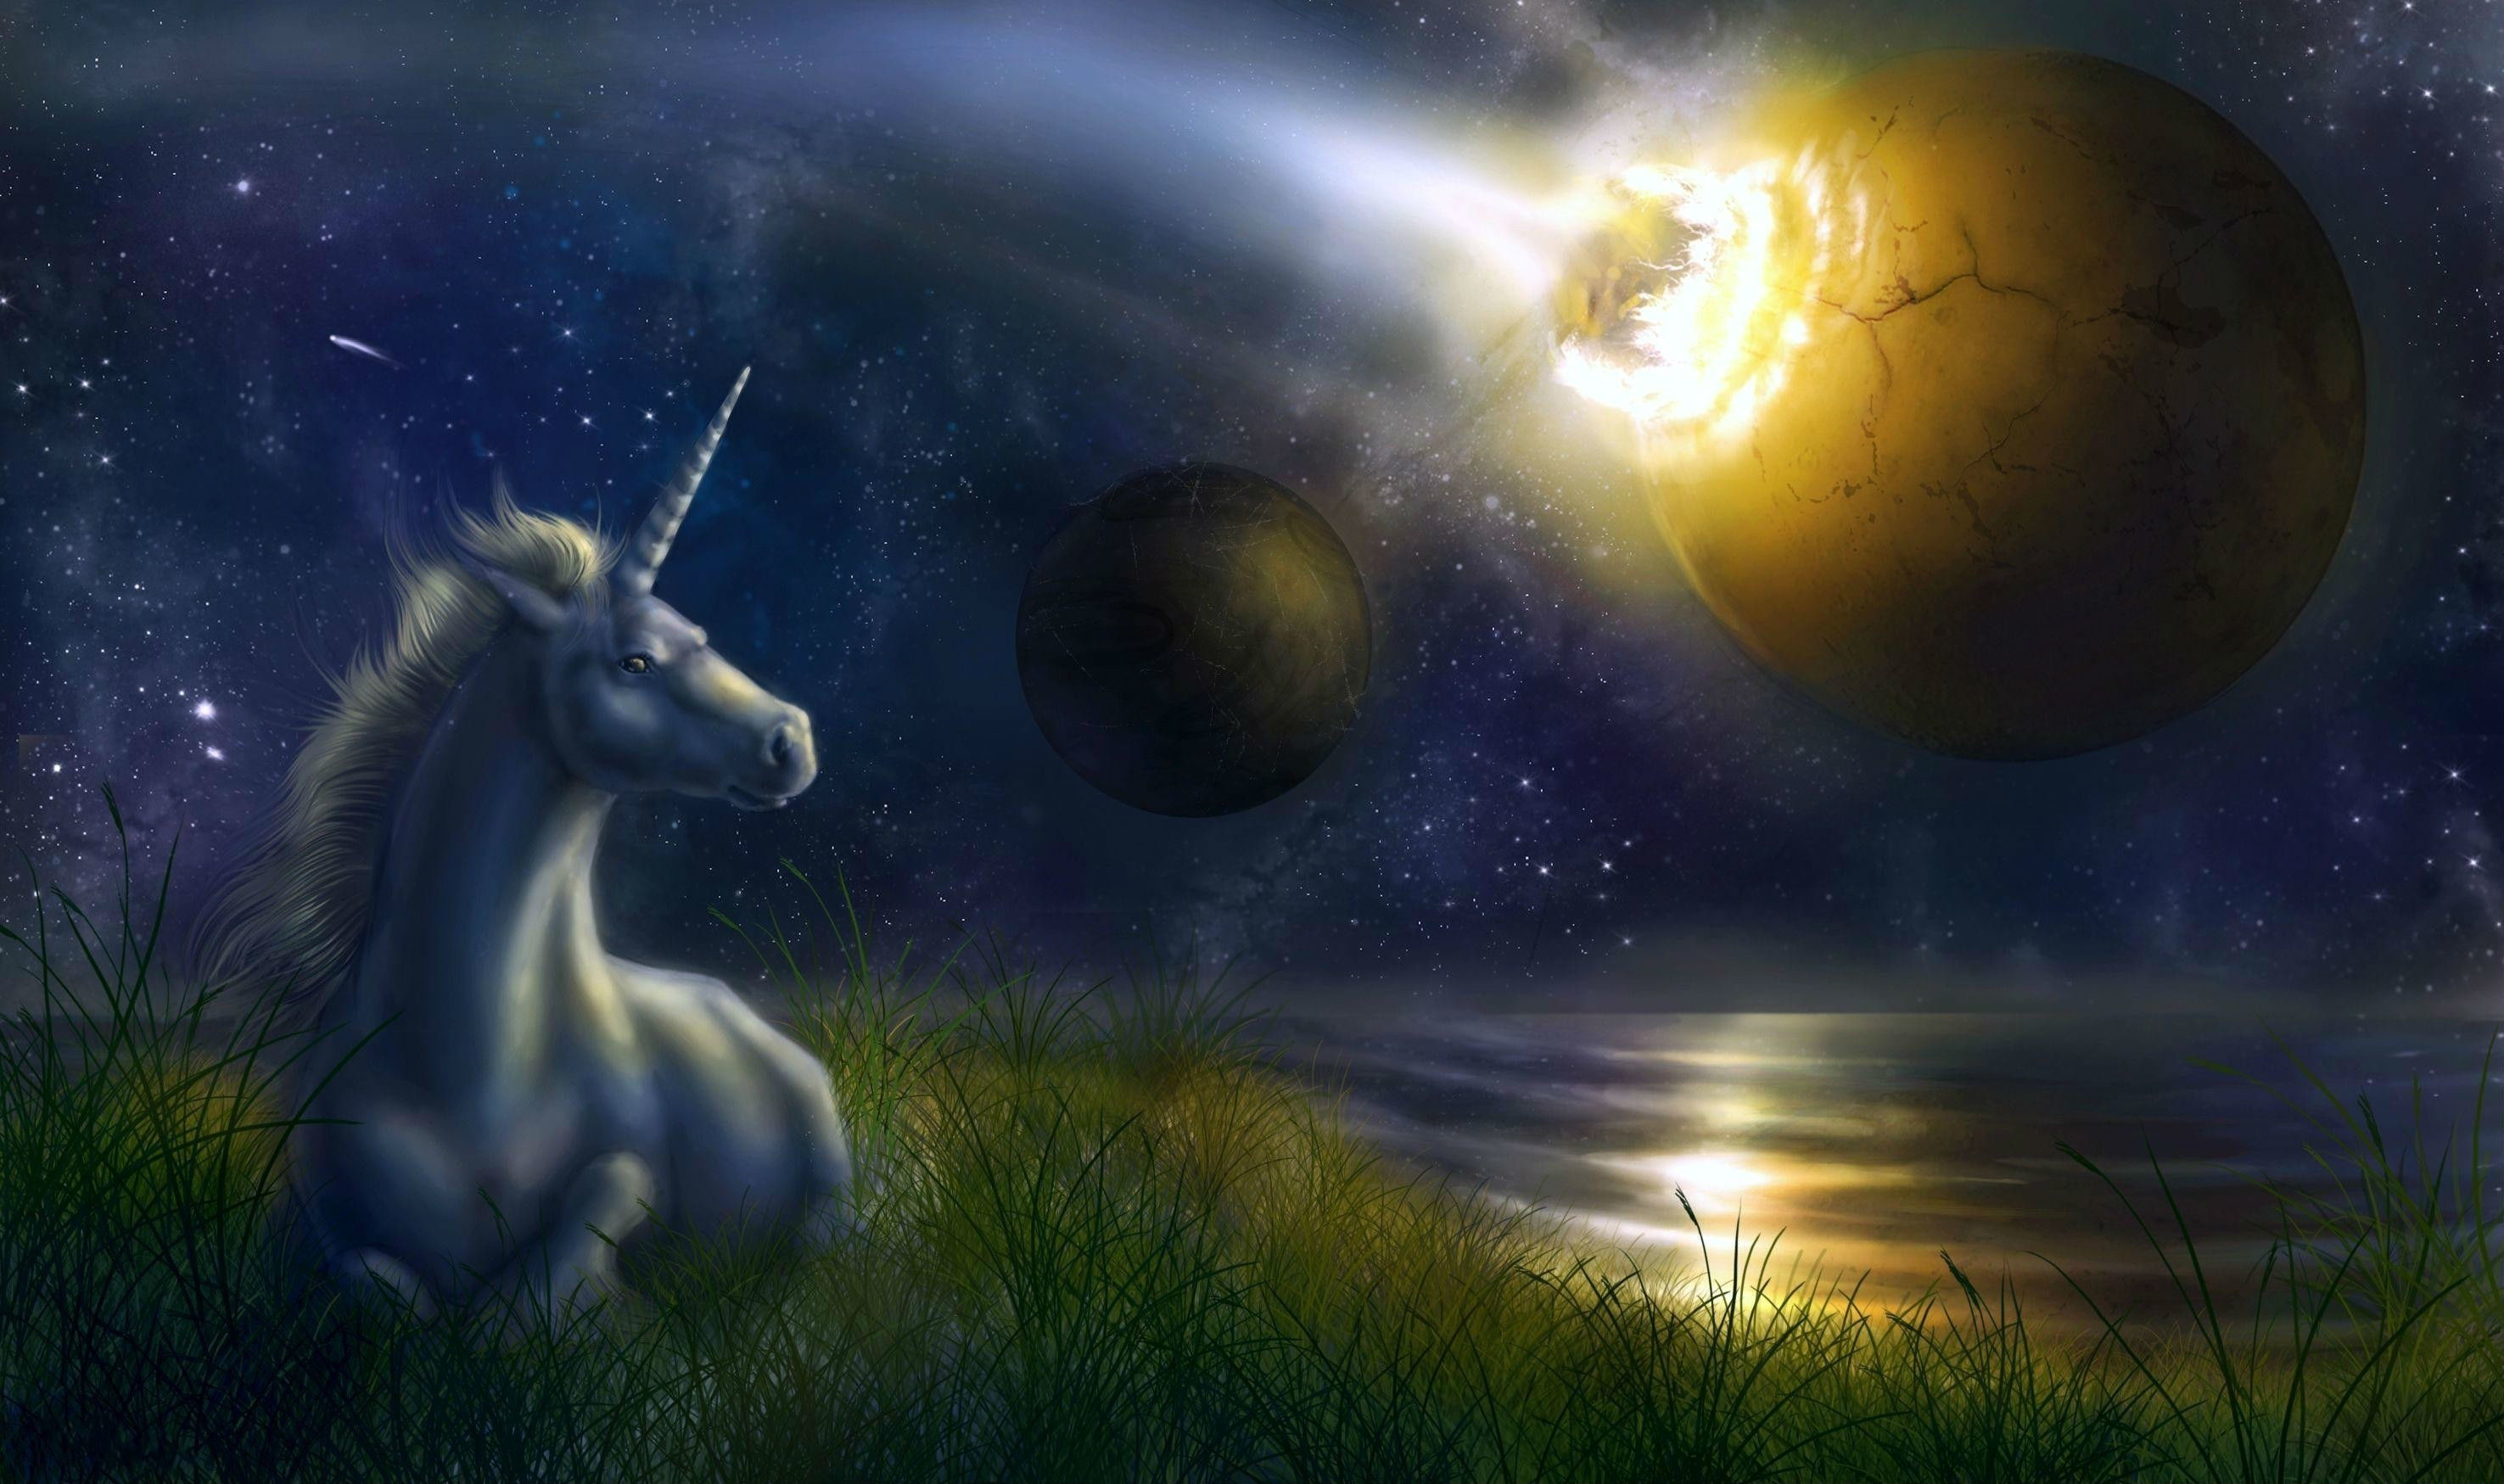 2951x1749 Inages-Download-Unicorn-Backgrounds